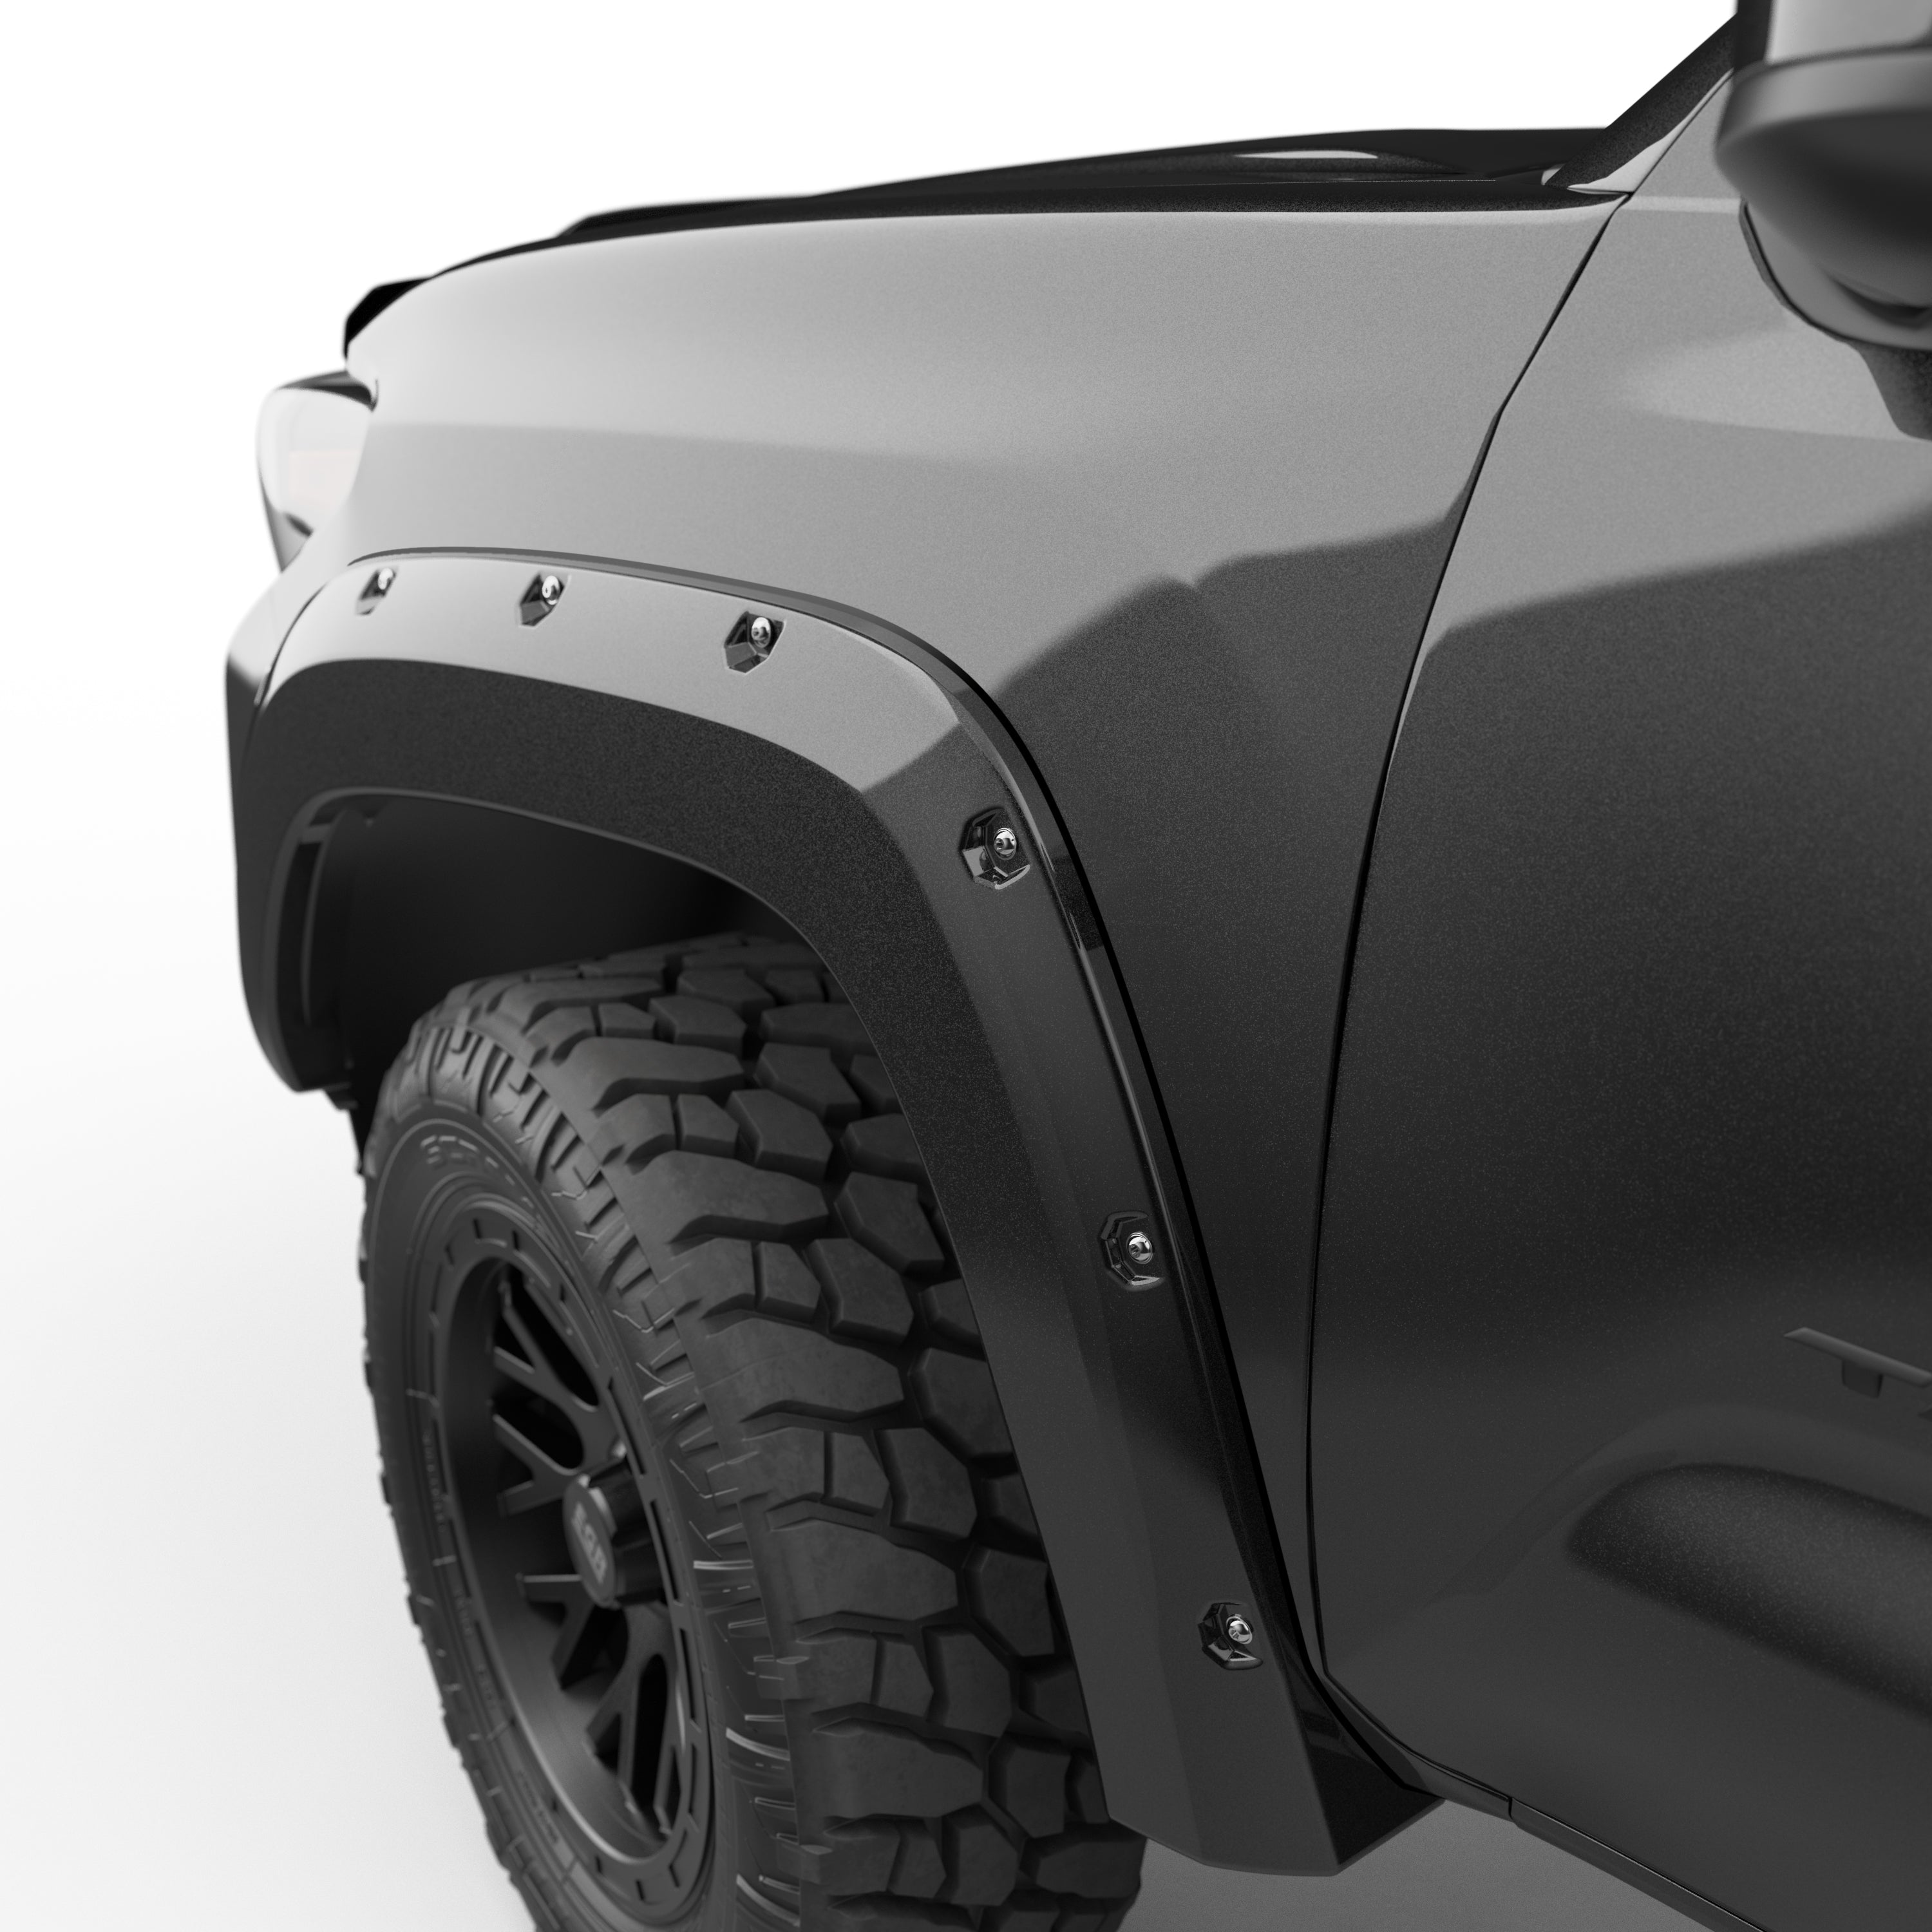 EGR 2016-2023 Toyota Tacoma 4 Door Extended Cab Crew Cab Pickup Traditional bolt-on look Fender Flares set of 4 Paint to Code Black 795084-202